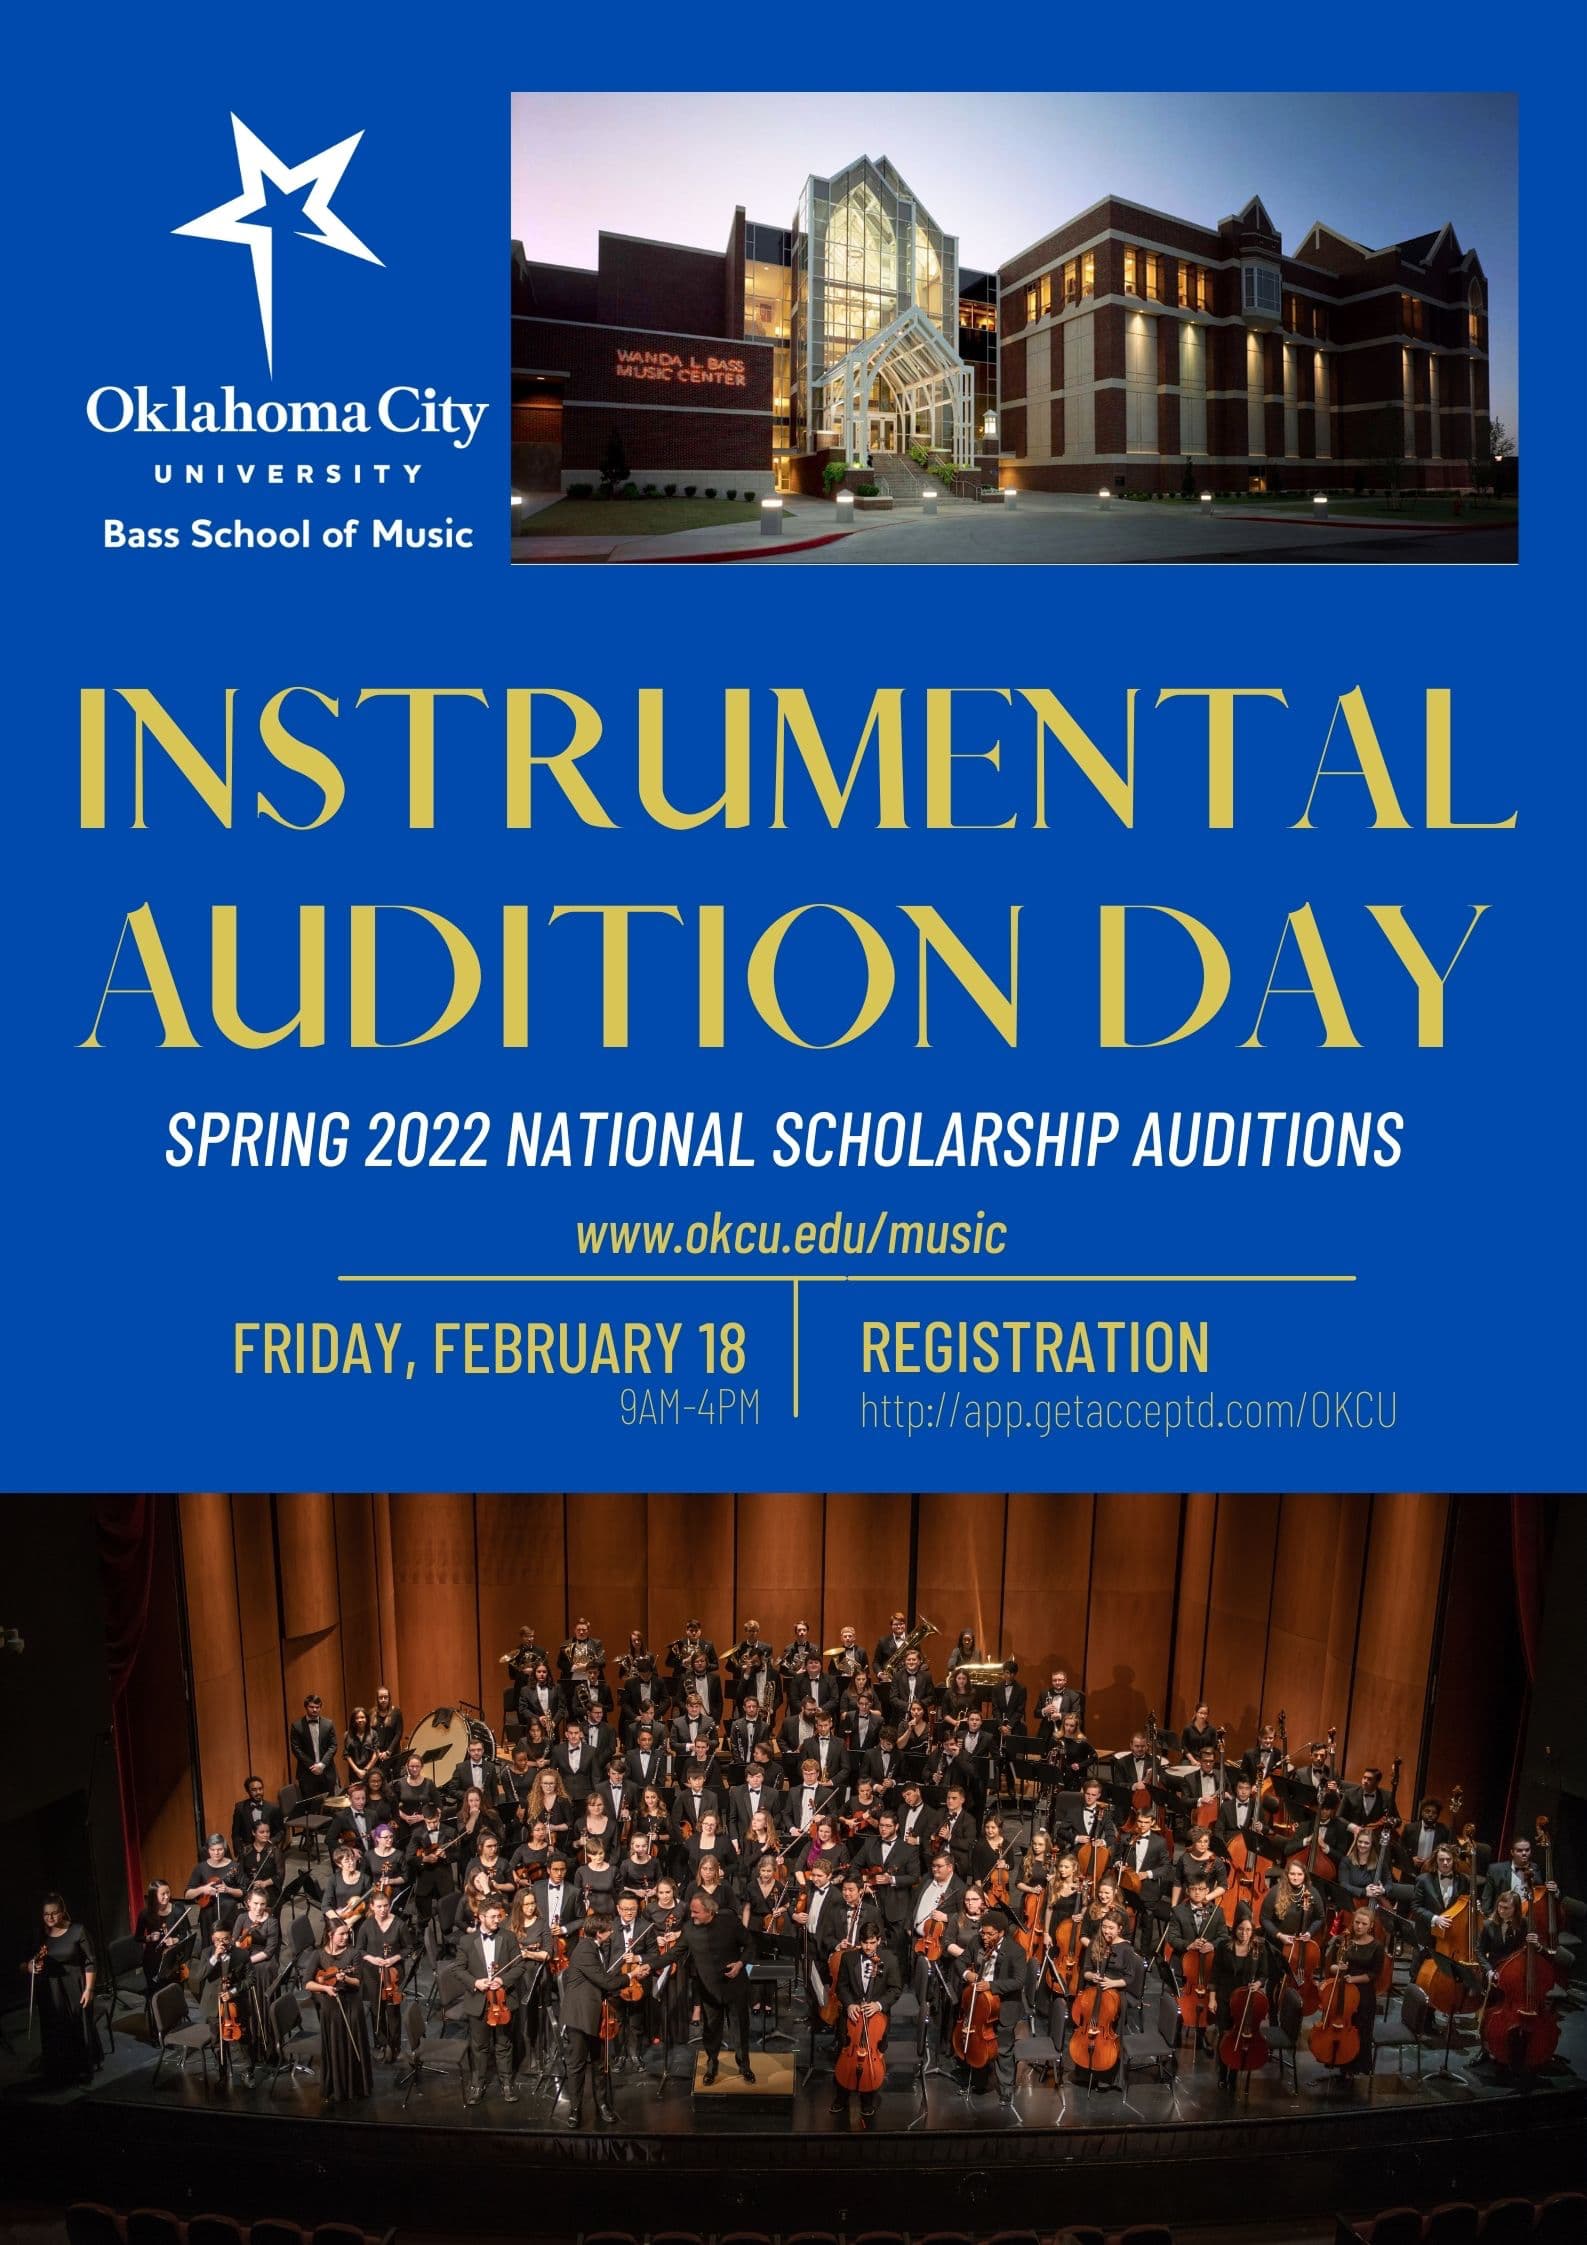 Instrumental Audition Day 2022/Spring 2022 National Scholarship Auditions/Friday, February 18th 9am-4pm